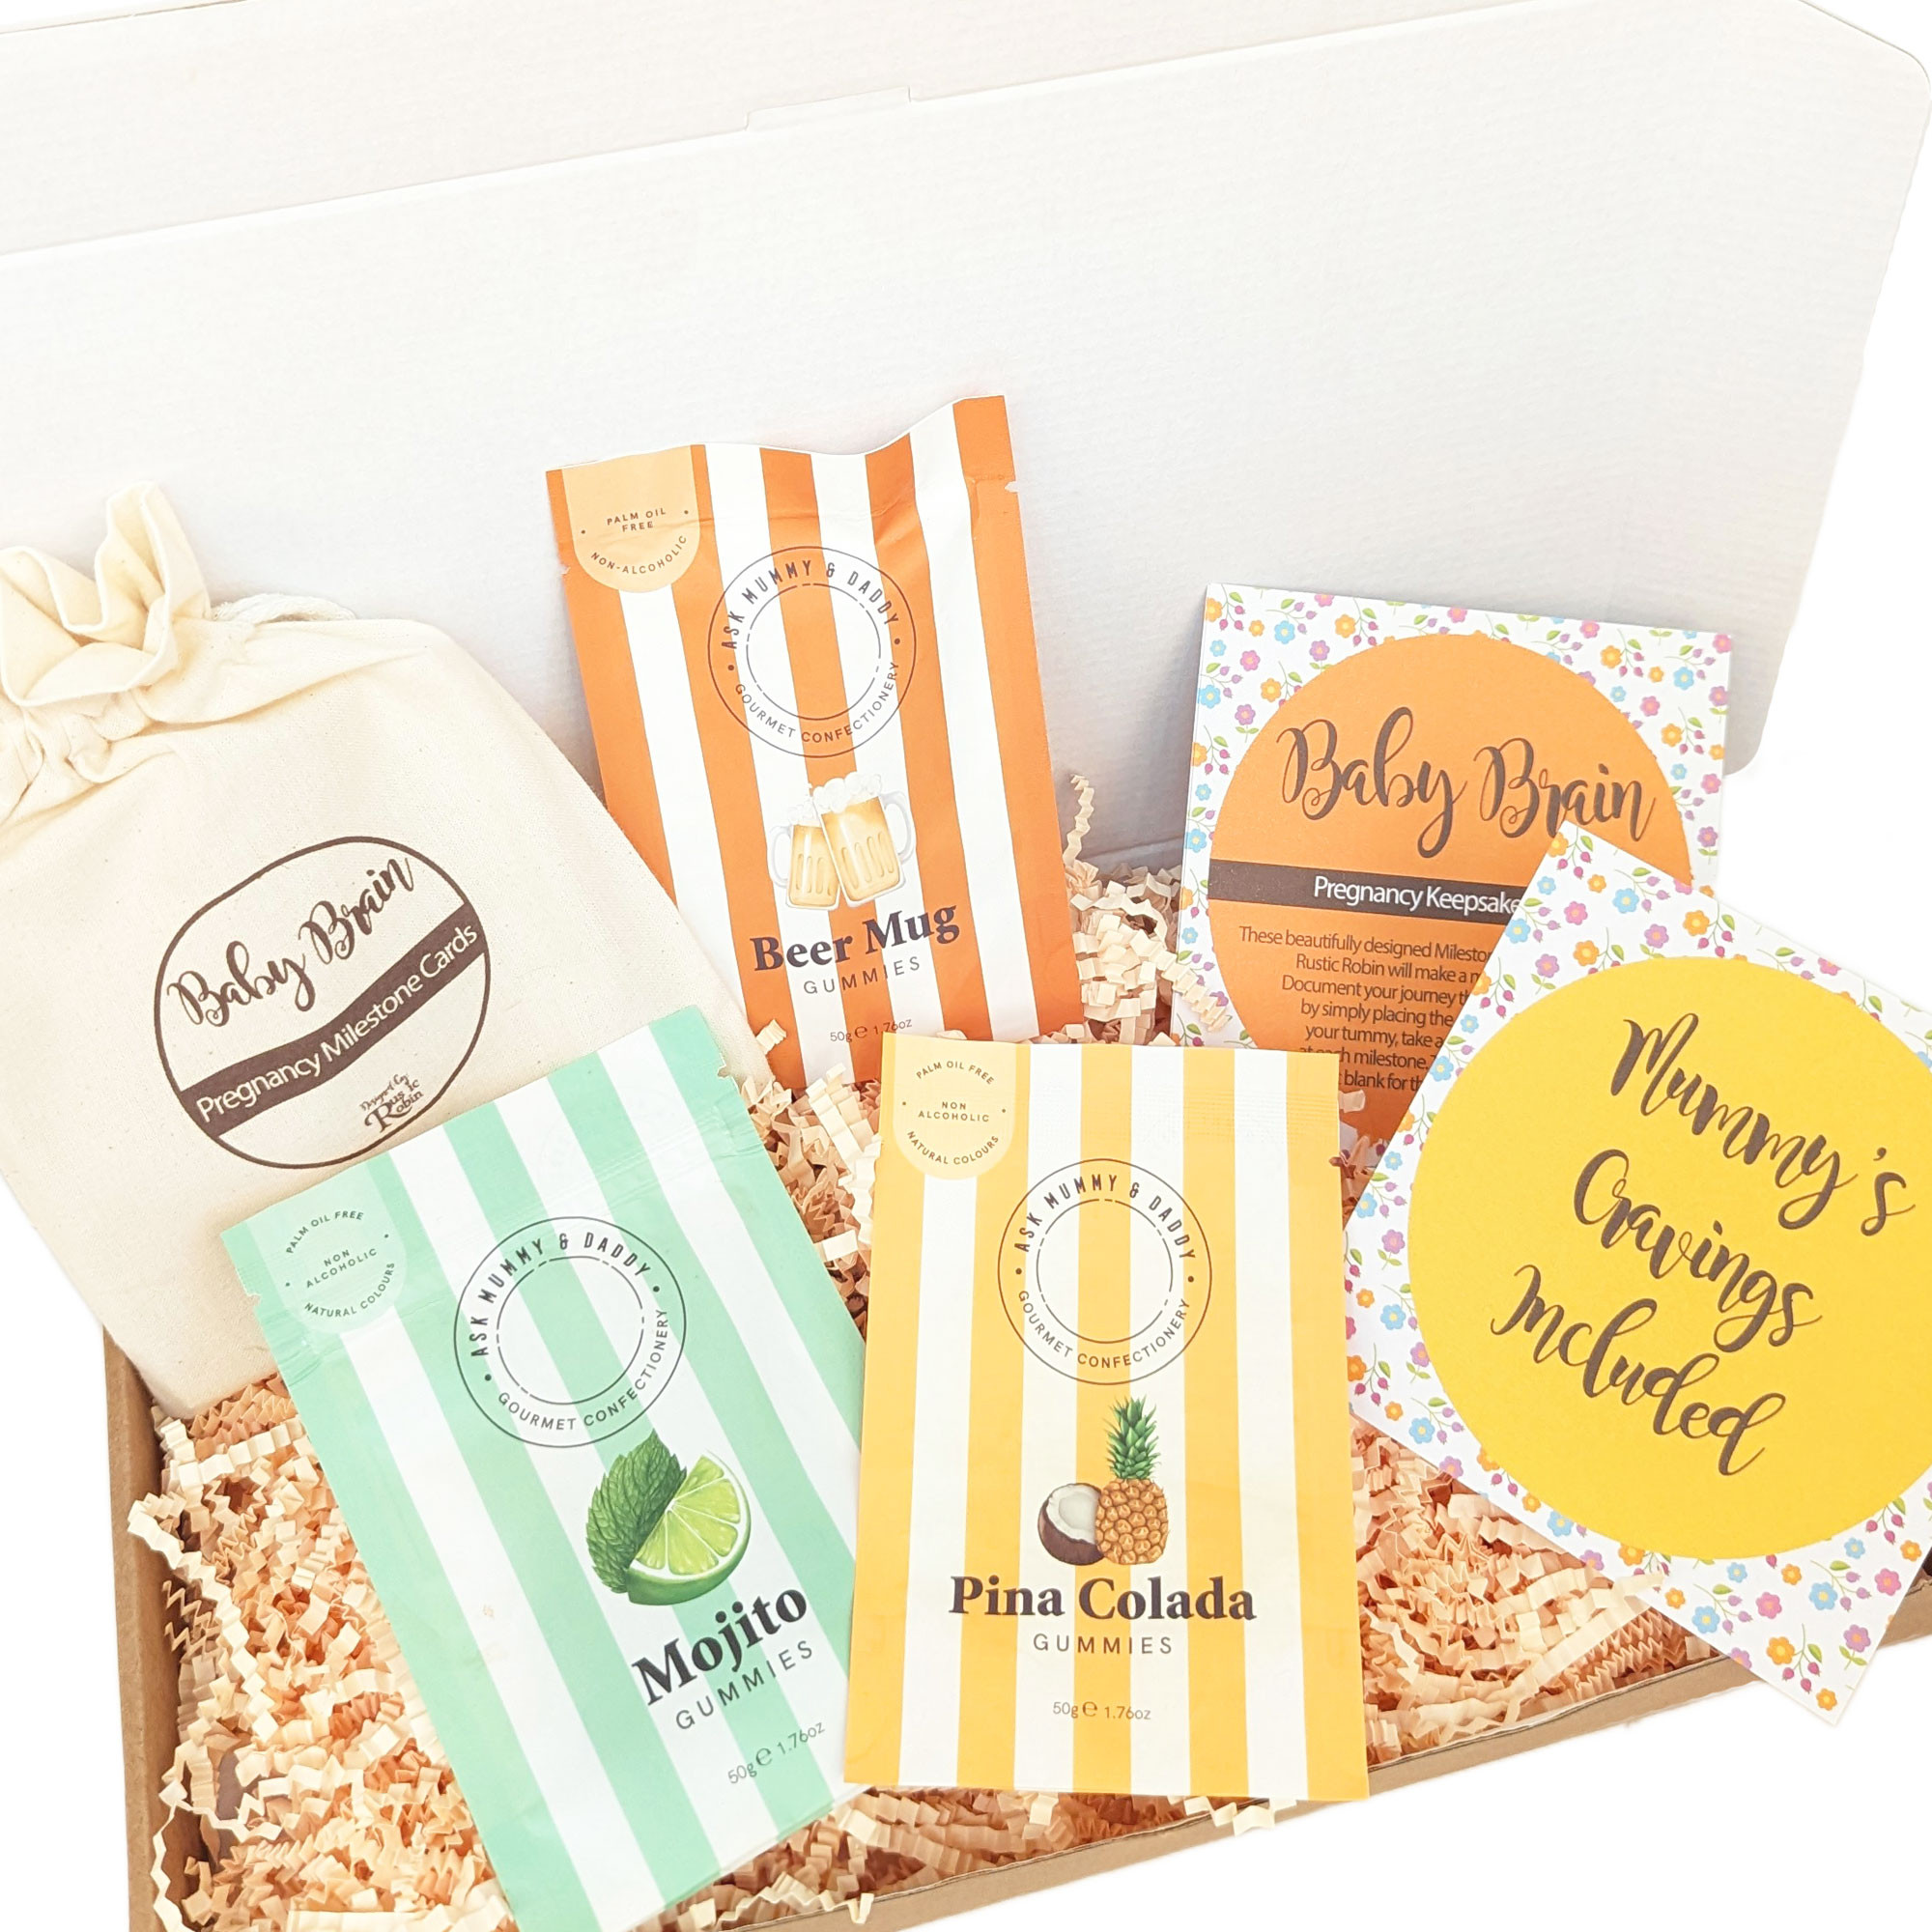 Mum To be Gift - Cheeky Non Alcoholic Sweet Treat & Pregnancy Milestone Cards